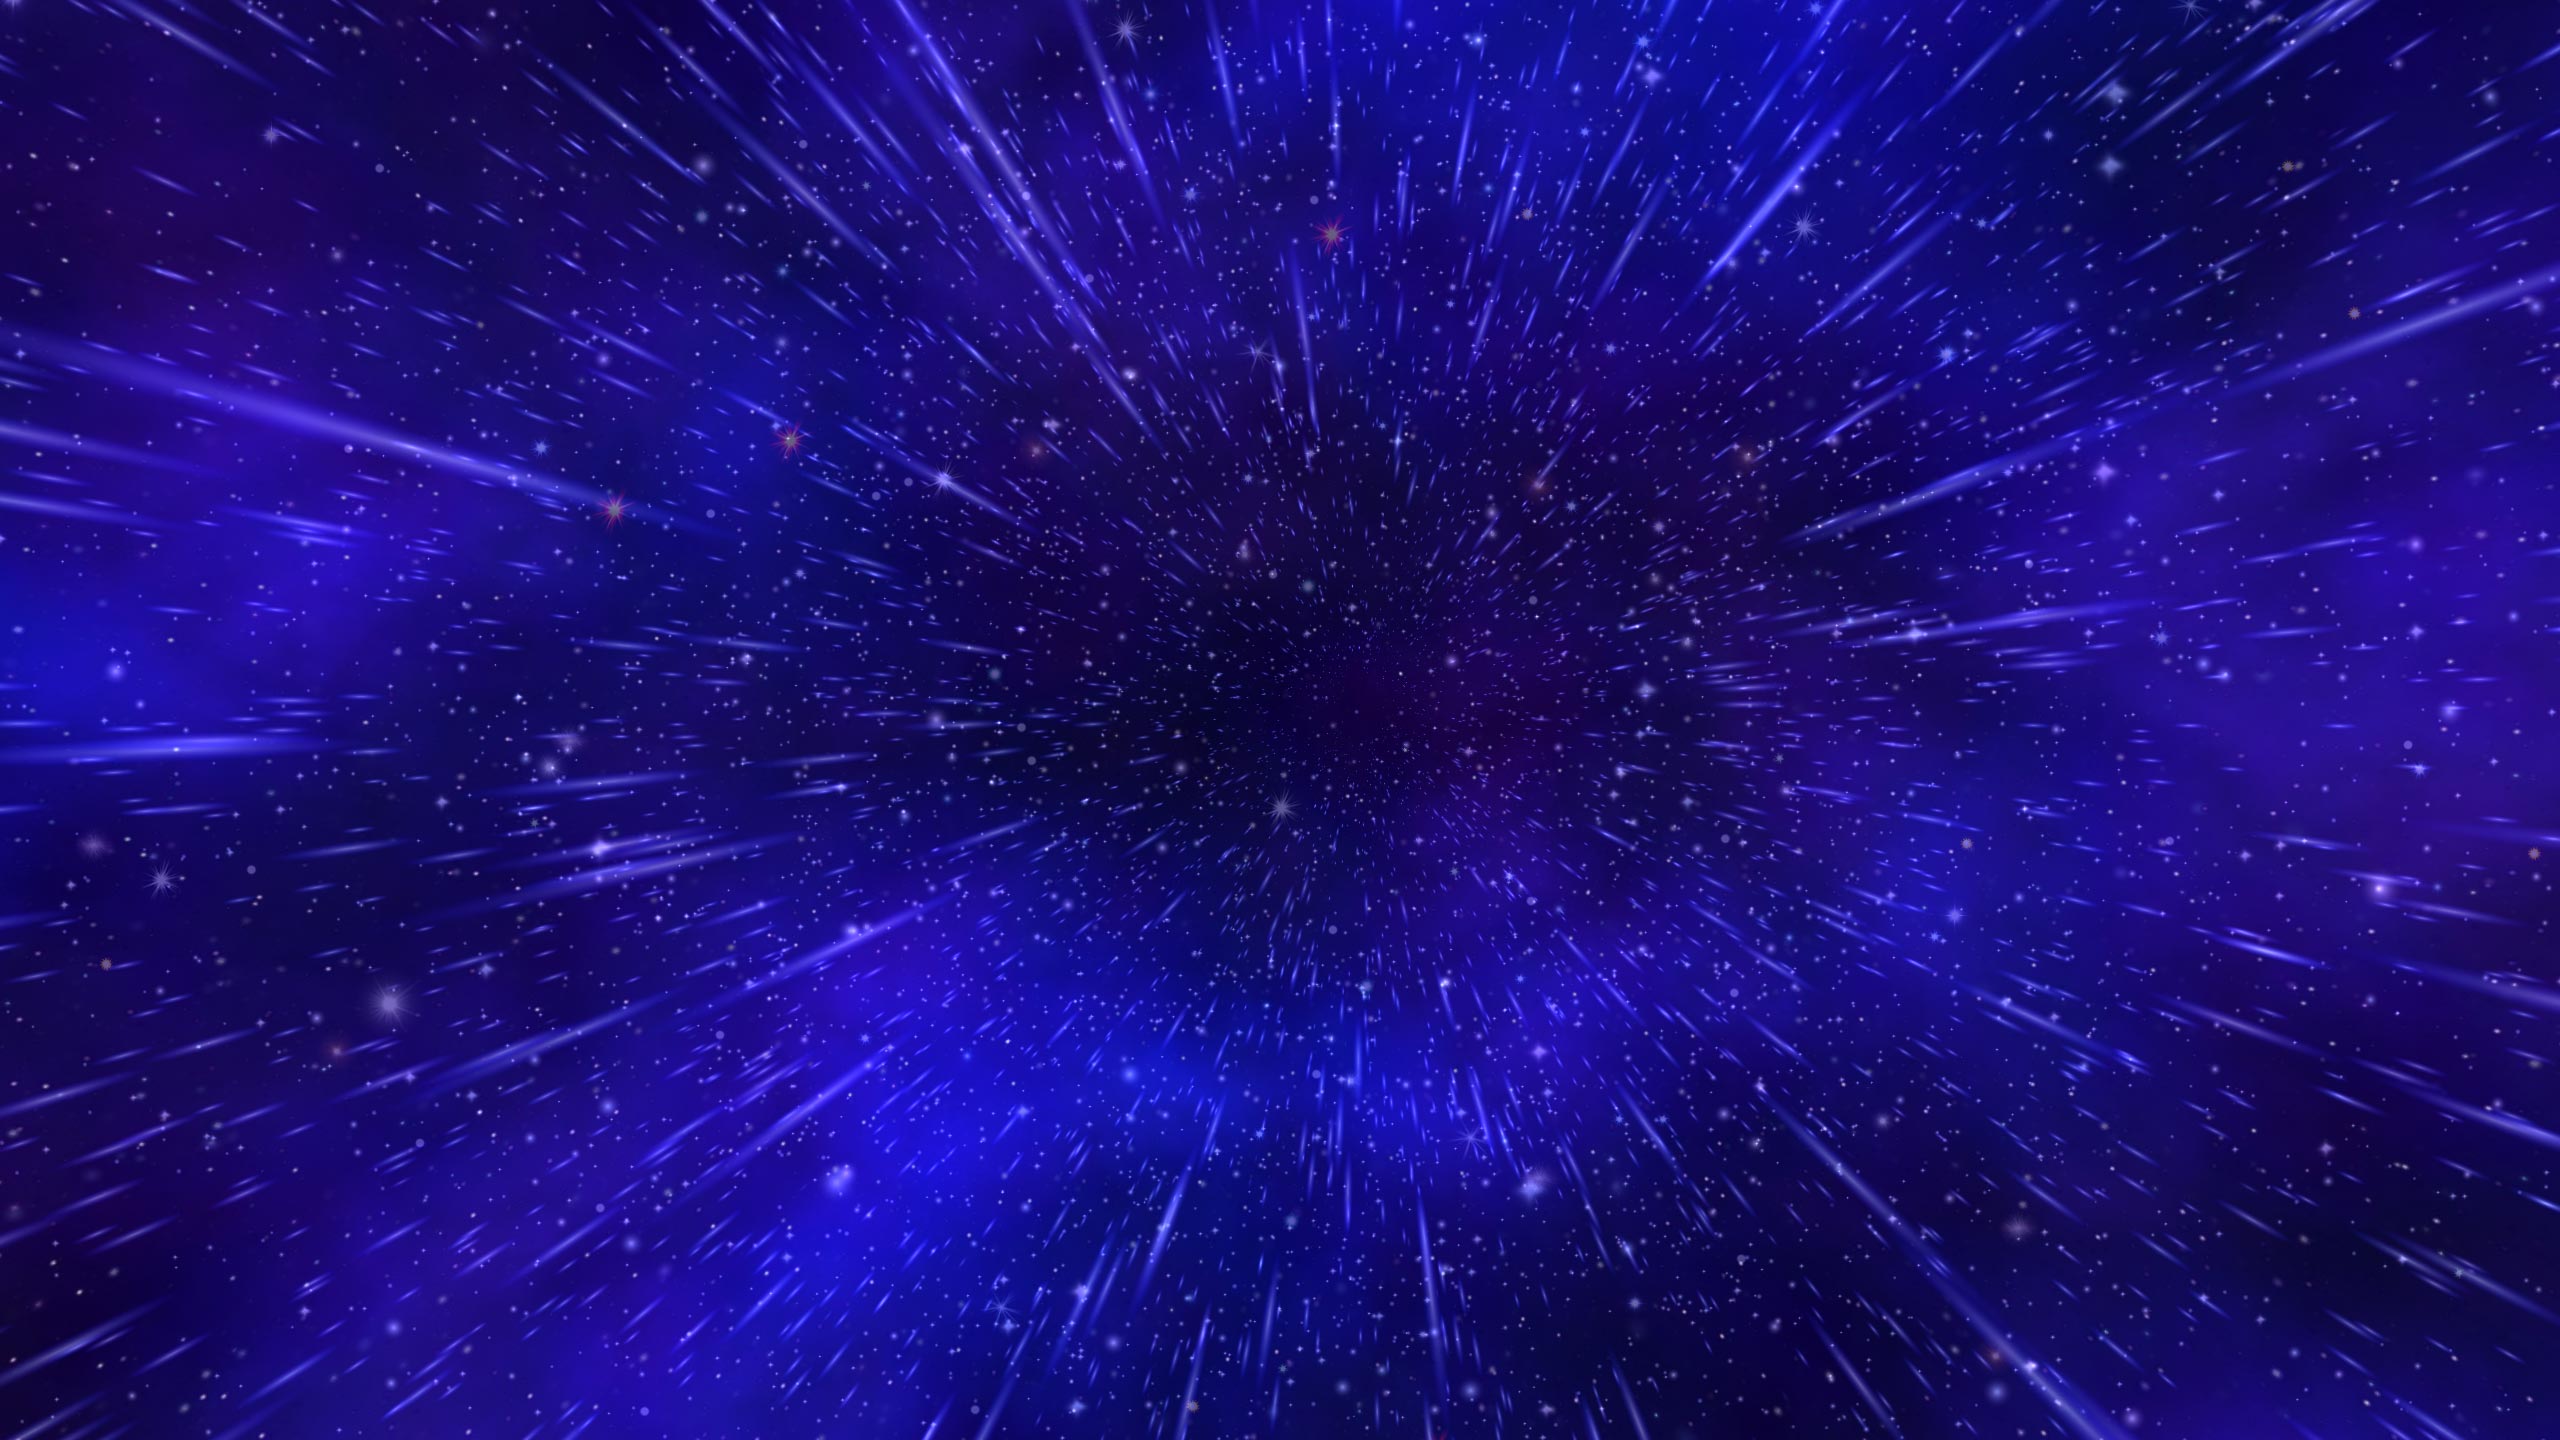 Moving Animated Space Background - 2560x1440 Wallpaper 